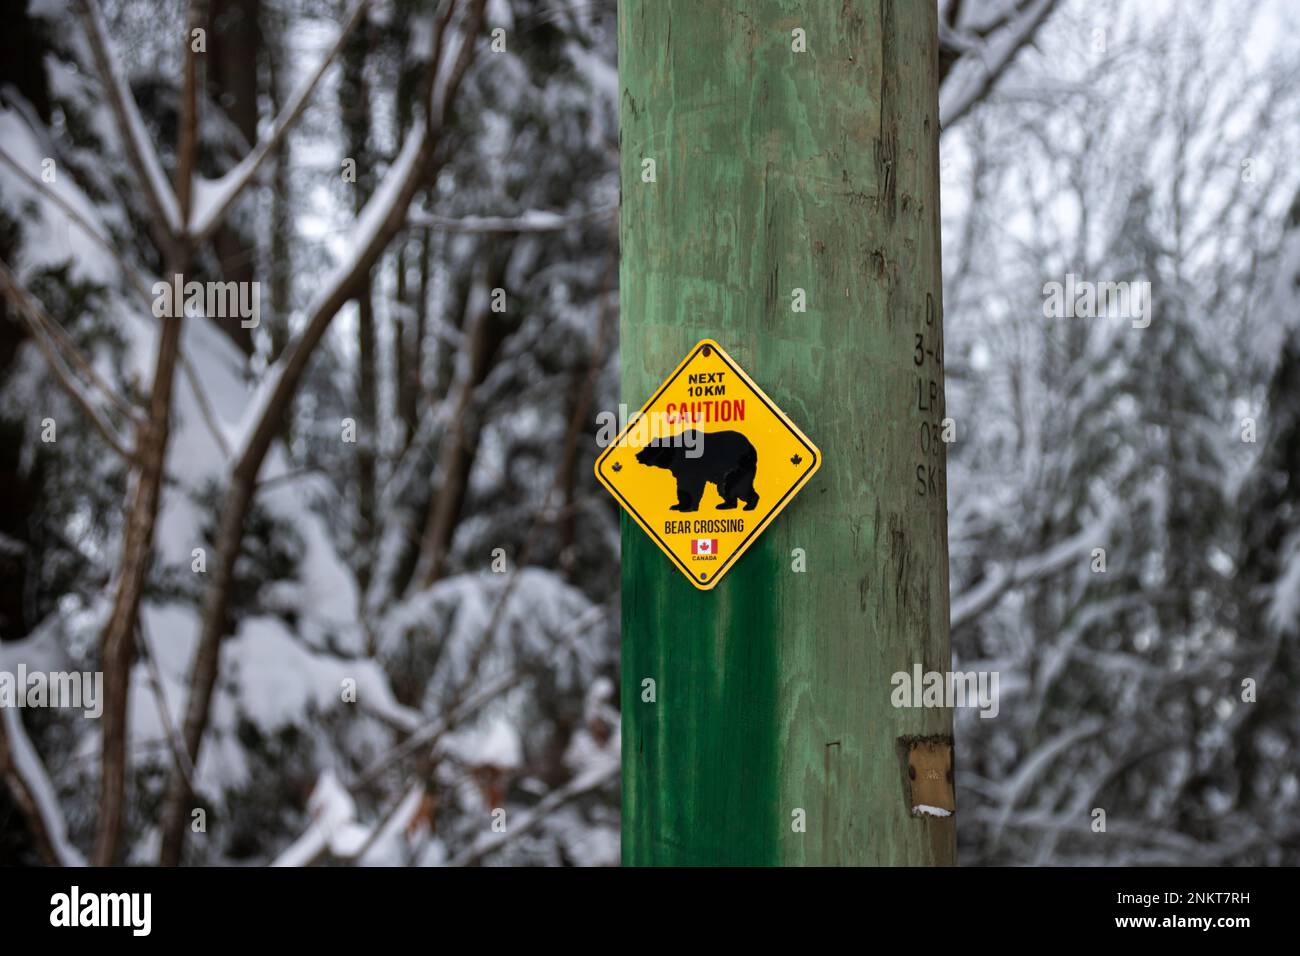 Vancouver, CANADA - Dec 20 2022 : “Next 10km Caution, Bear Crossing” sign in the park winter season. Stock Photo